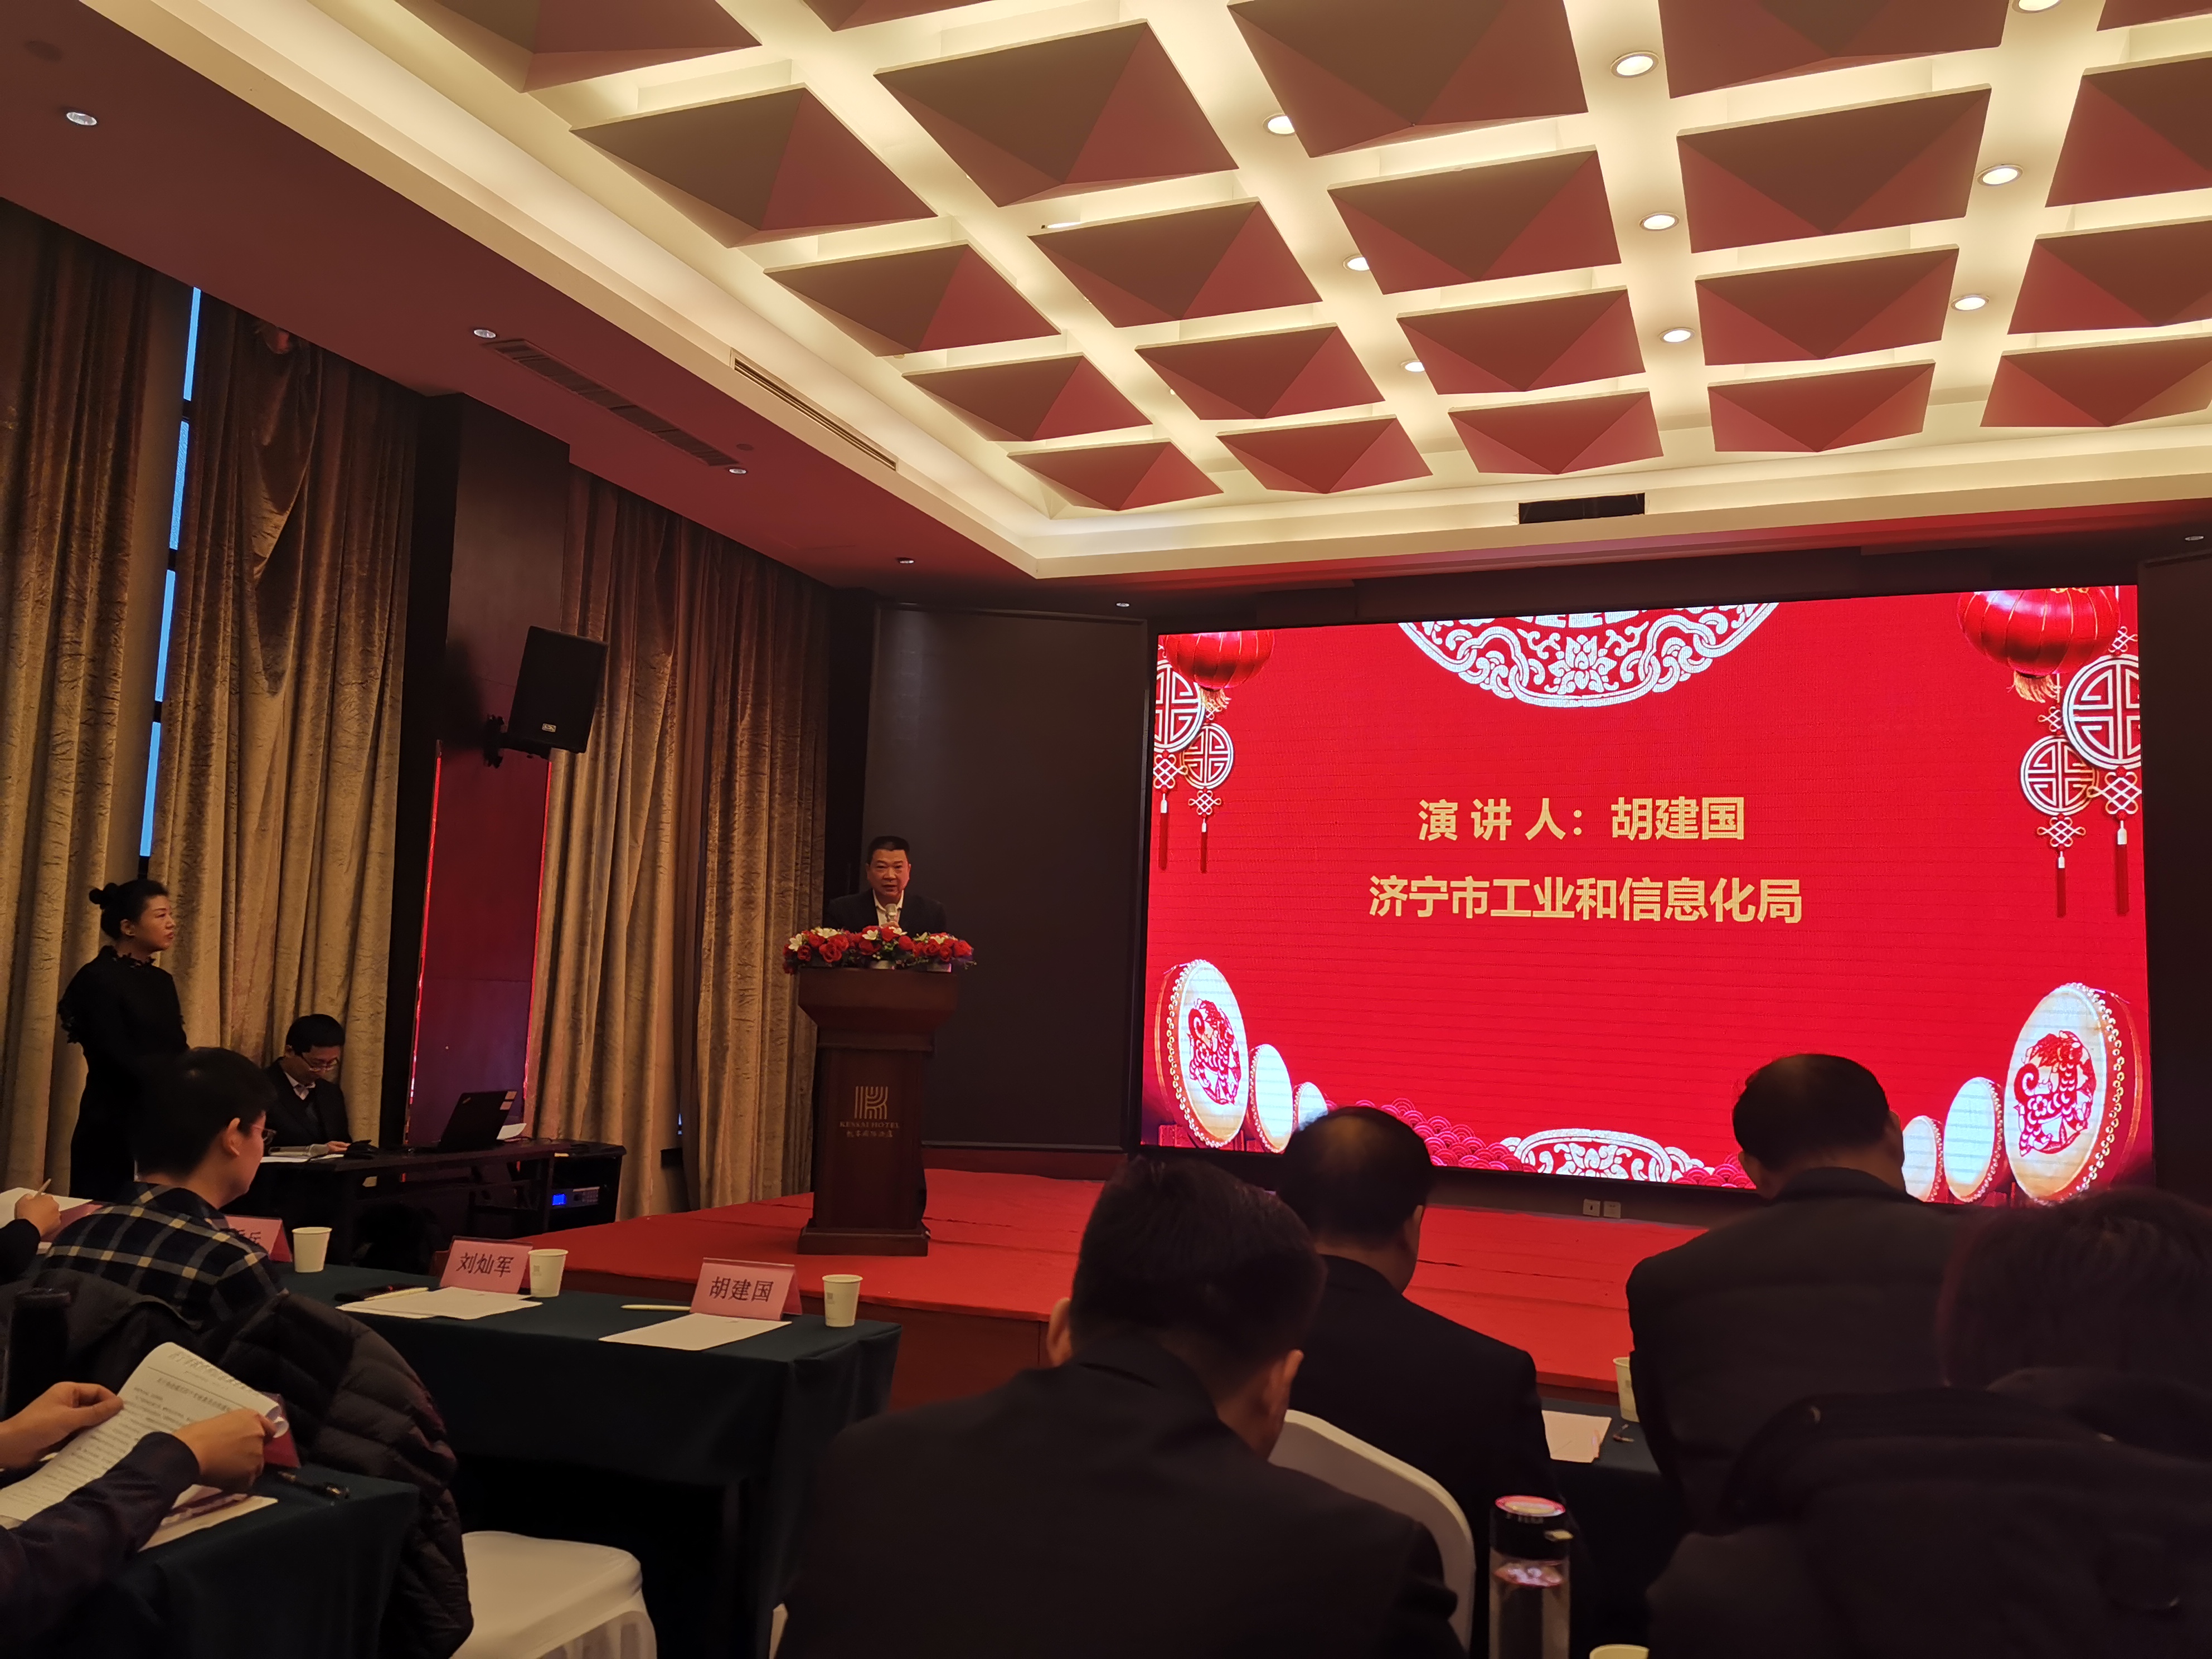 Warm Congratulations To China Coal Group Subsidiary Shenhua Information Co., Ltd., On Being Named An Excellent Software Company In Jining